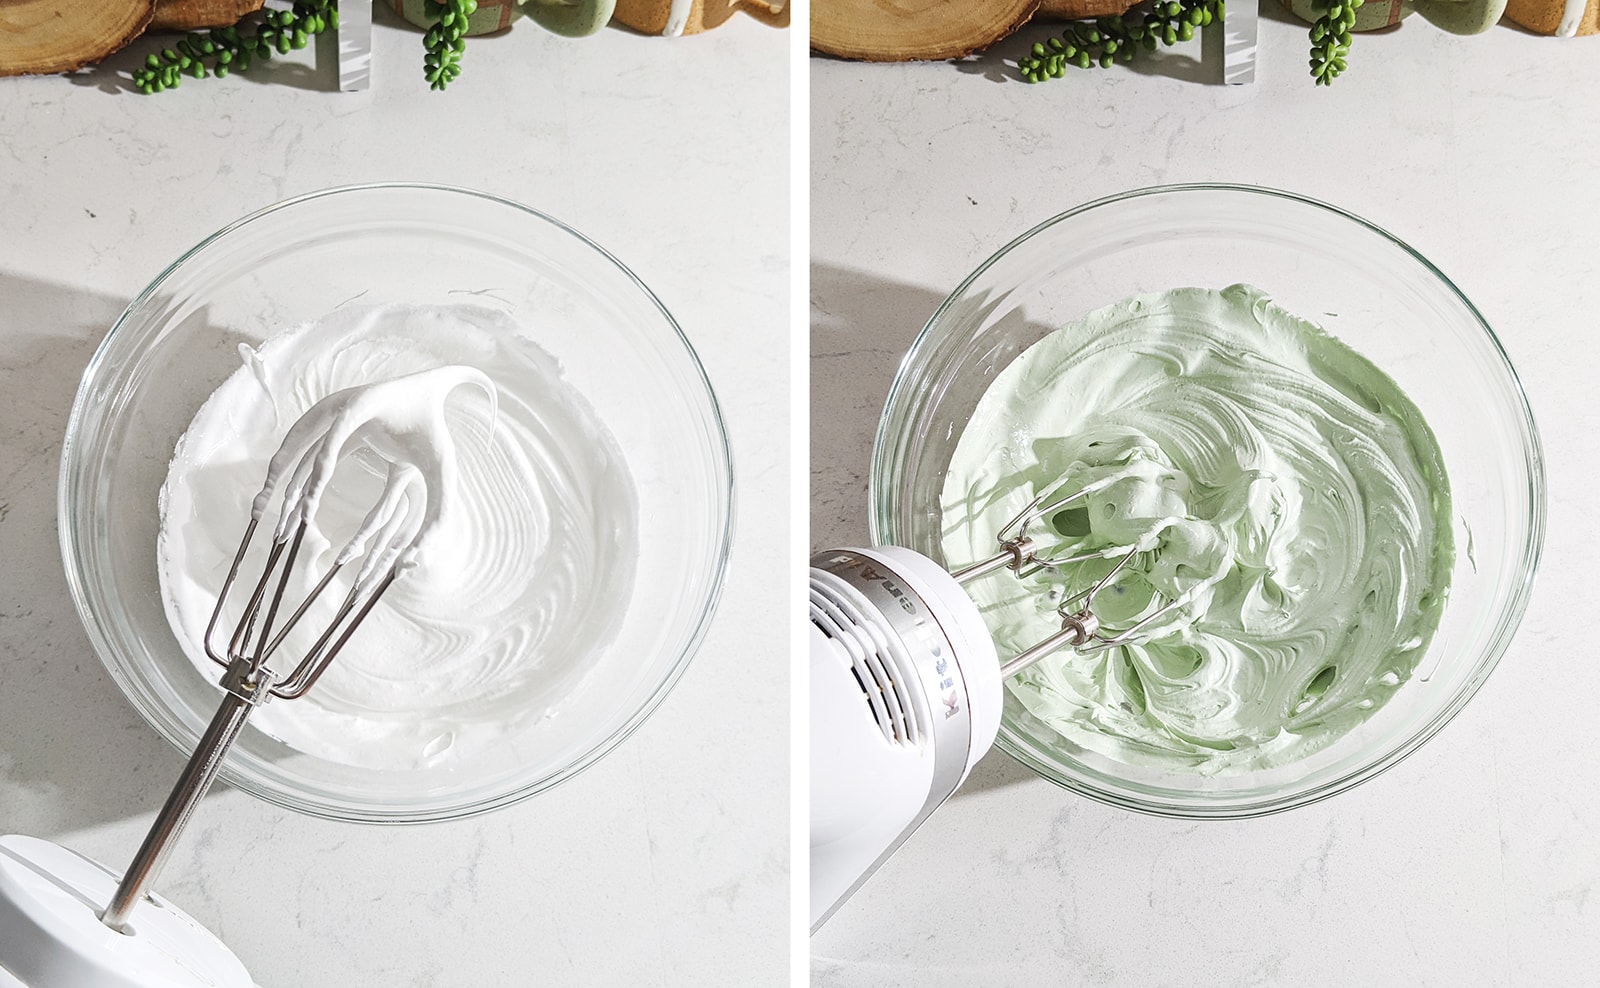 Whipping meringue to stiff peaks and adding green food colouring.